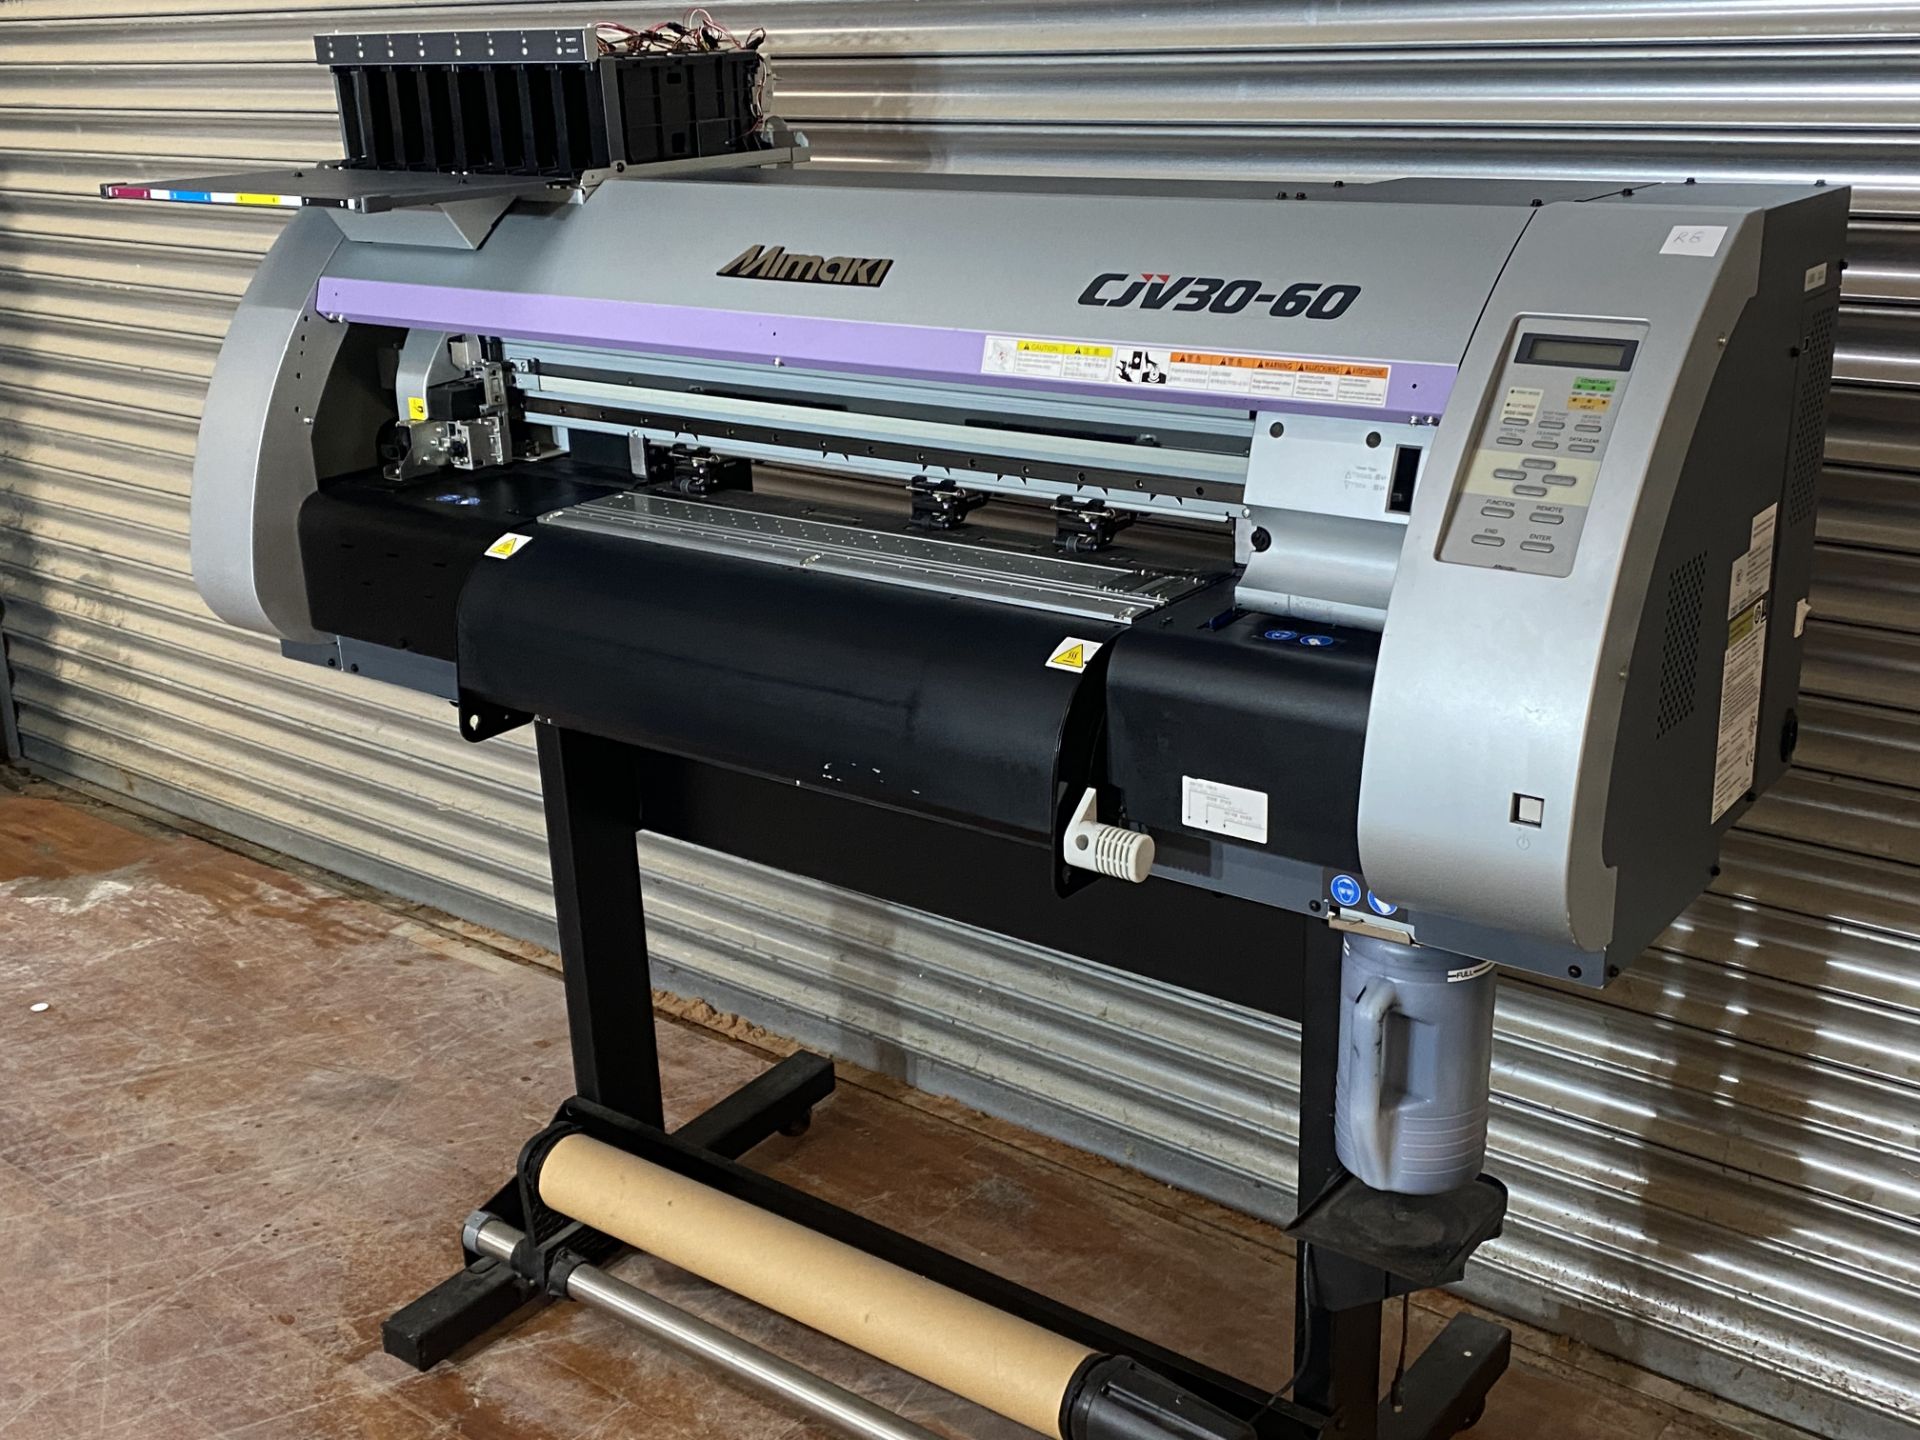 (R8) MIMAKI CJV 30-60 ECO SOLVENT PRINT AND CUT LARGE FORMAT PRINTER - Image 2 of 3